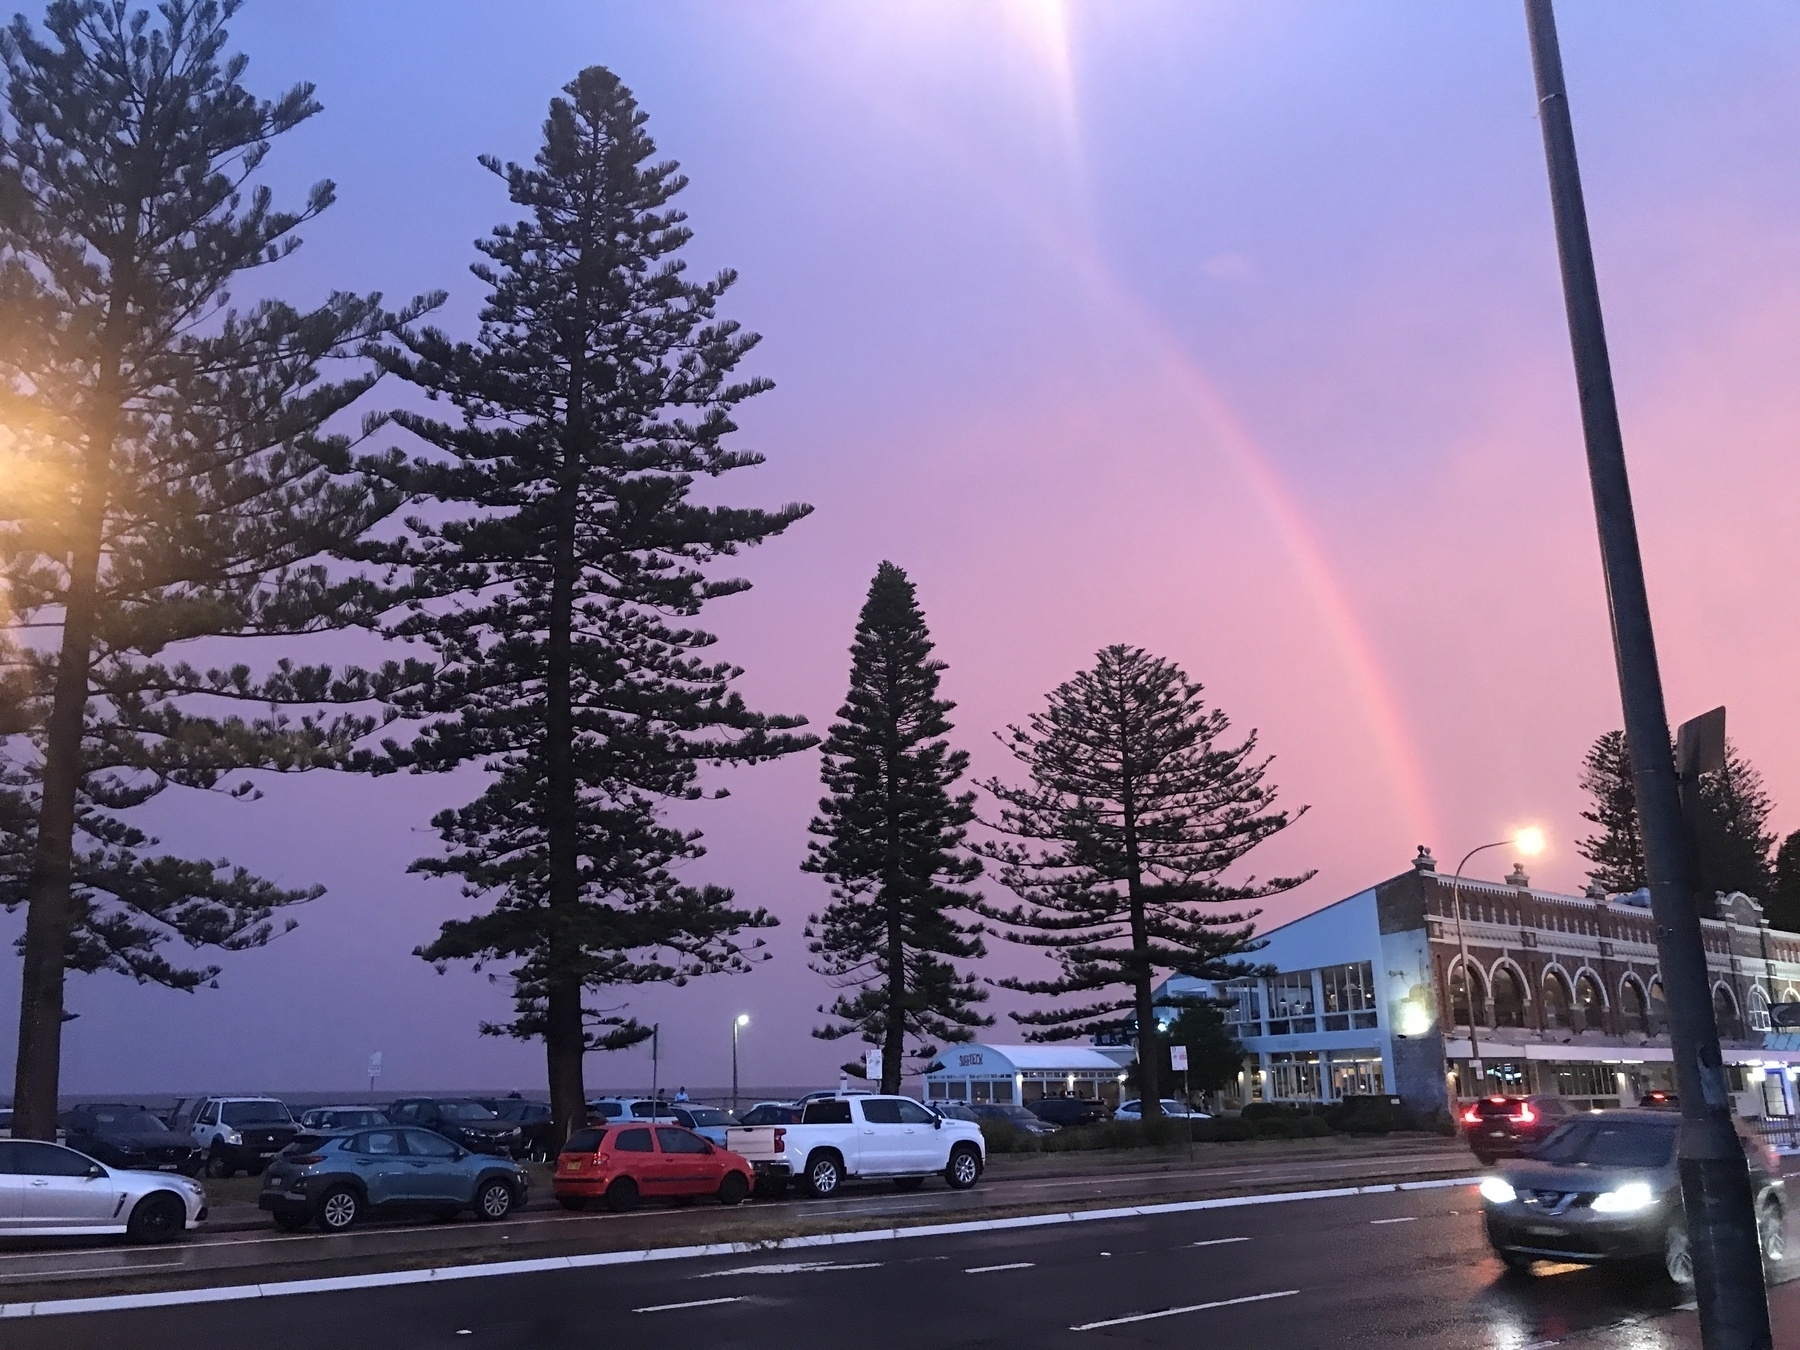 A wet, shiny main road in the early evening, and cars with their lights on. Across the road, four Norfolk Pine trees stand in silhouette against a blue sky that shades to grey on the horizon. A band of pink runs through the middle of the sky where a skinny rainbow curves up from the roof of a long, two-storey building with big, arched windows. The rainbow climbs steeply and exits half-way along the top of the photo.